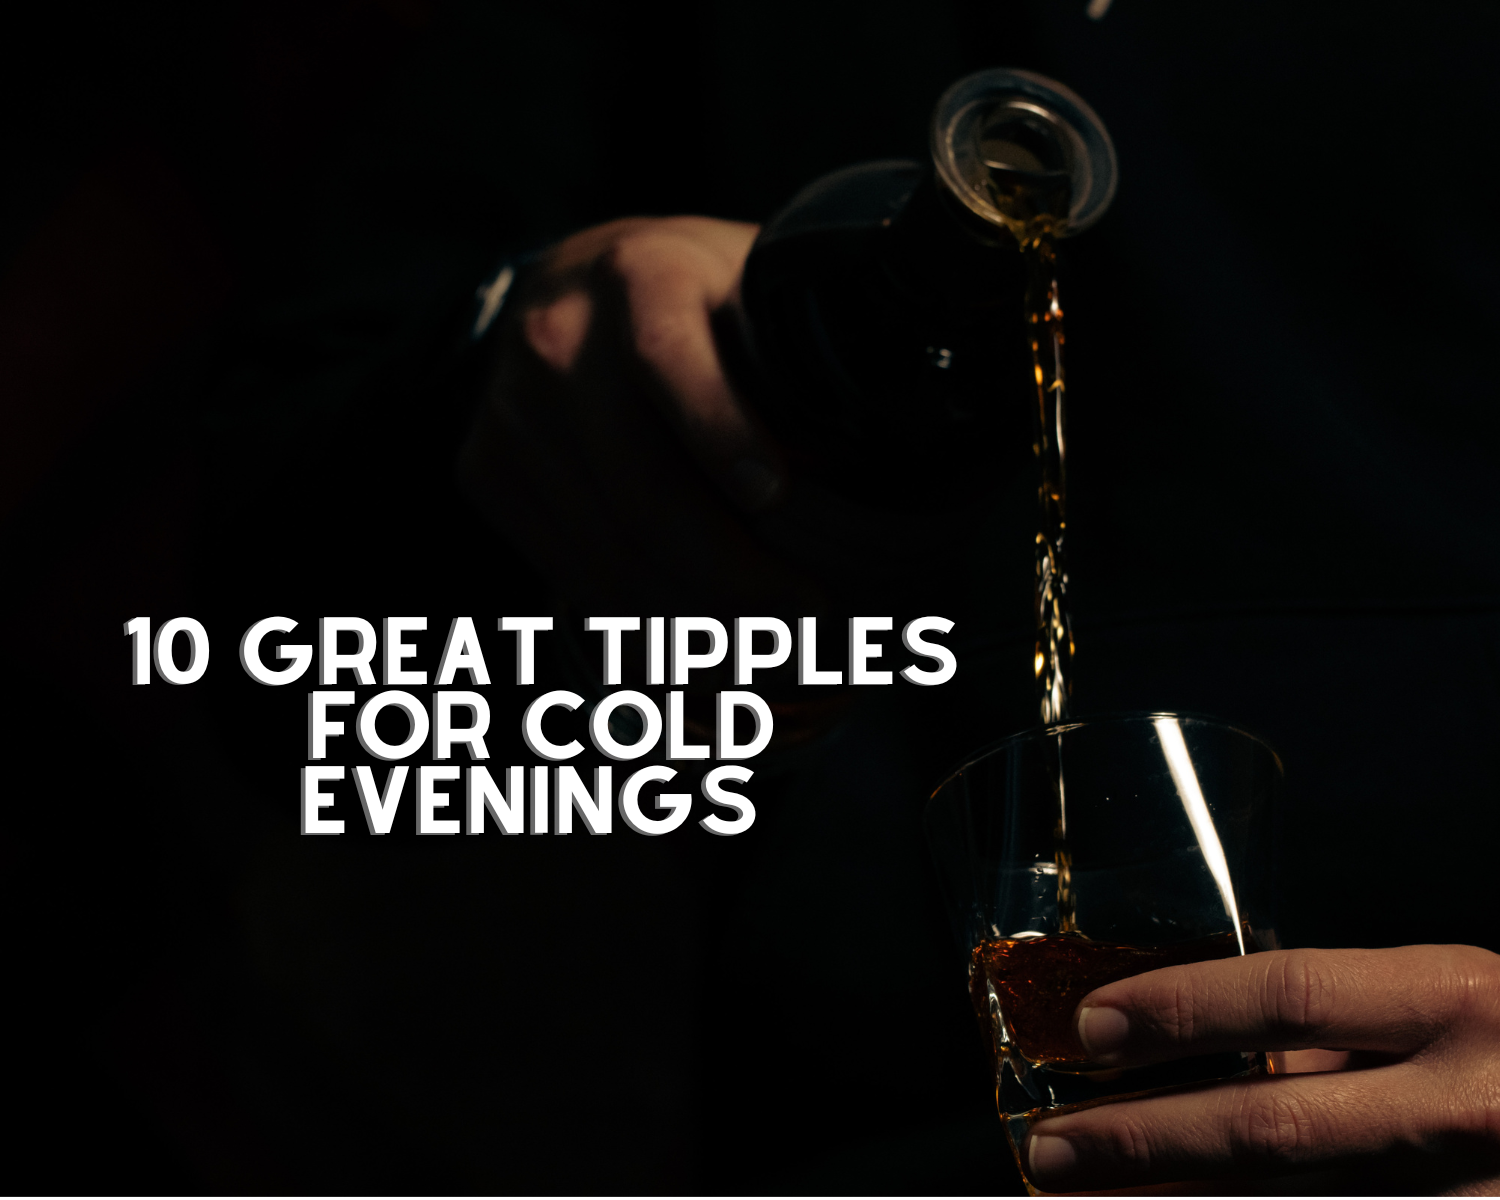 10 Great Tipples for Cold Evenings featured image